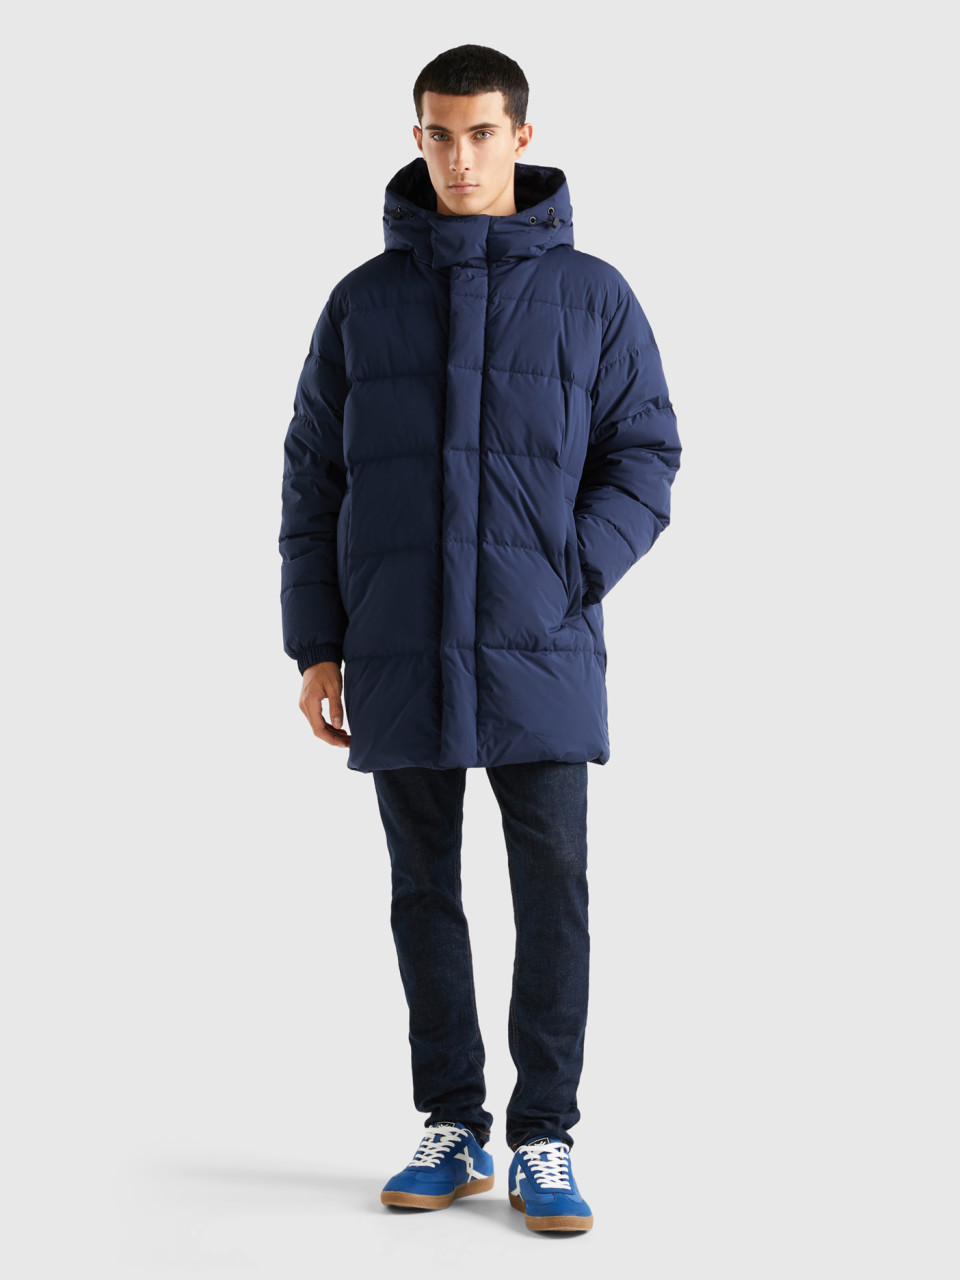 Benetton, Long Padded Jacket With Recycled Feathers, Dark Blue, Men